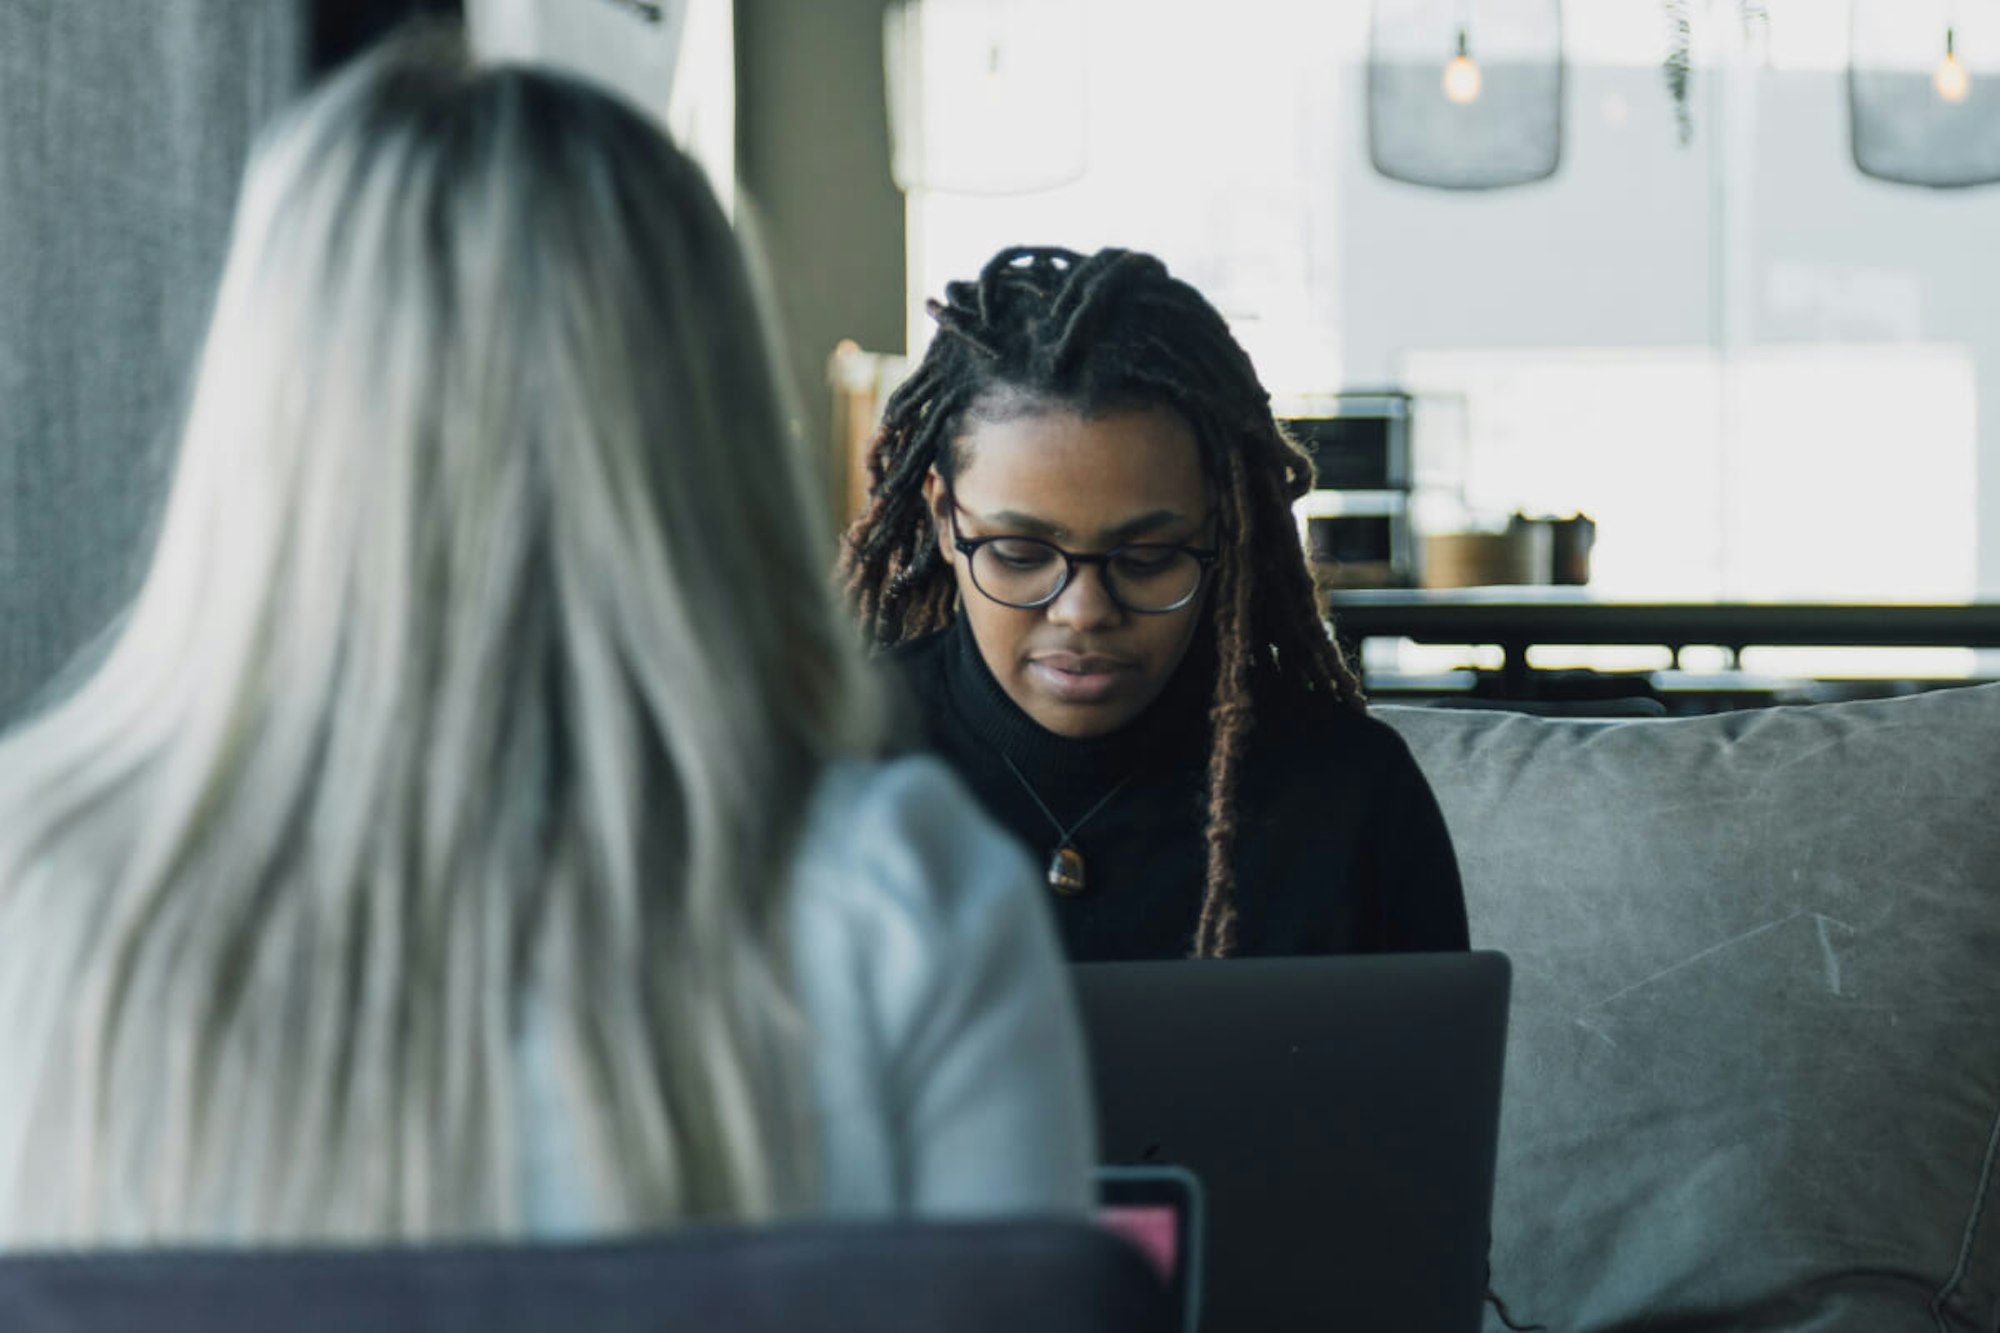 MakeReign women team members working at an office with laptops, one wearing glasses and locs in front view while blonde woman has her back to the camera